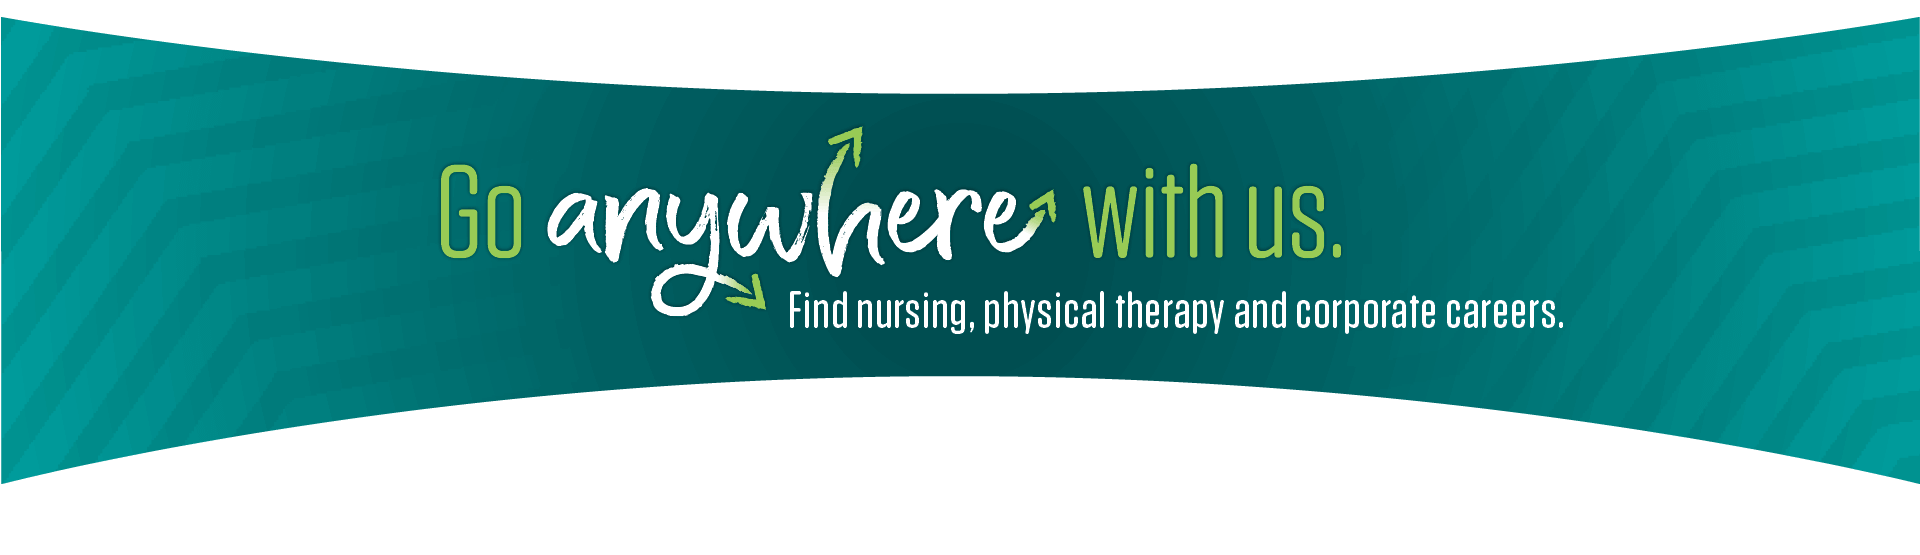 Go anywhere with us. Find nursing, physical therapy and other health care jobs.